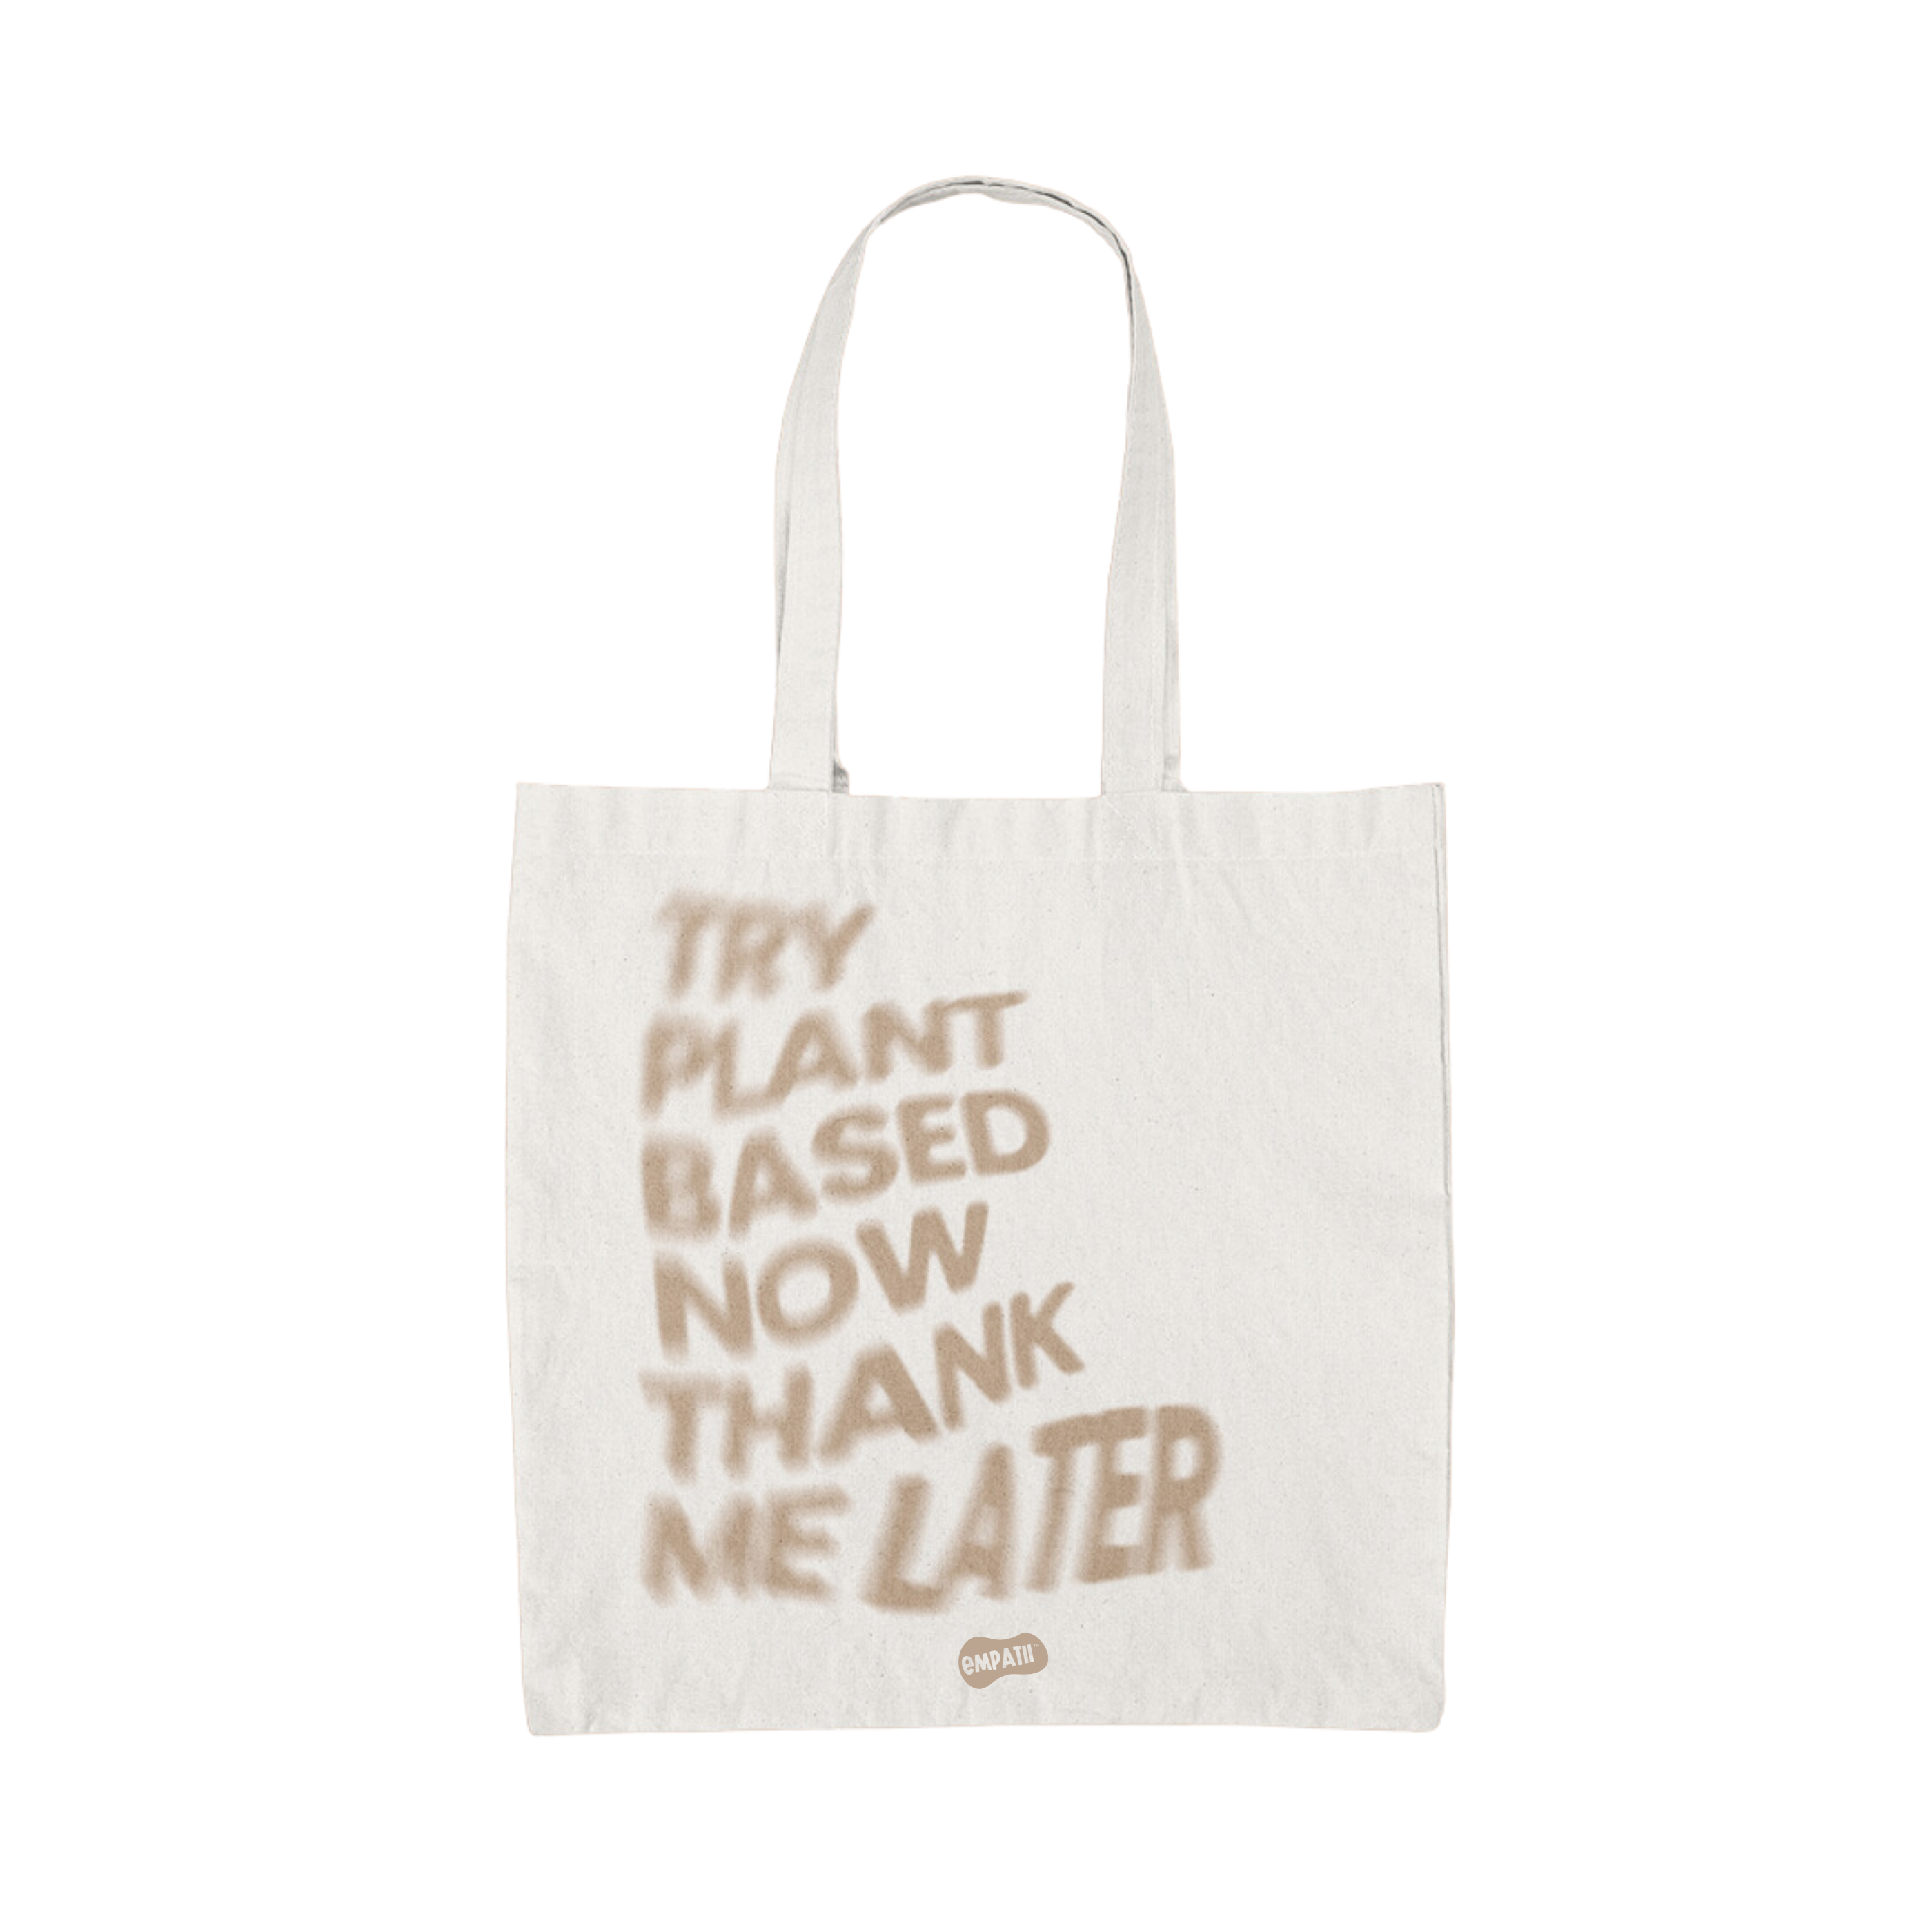 Try Plant Based Now - Large Tote Bag - Empatii